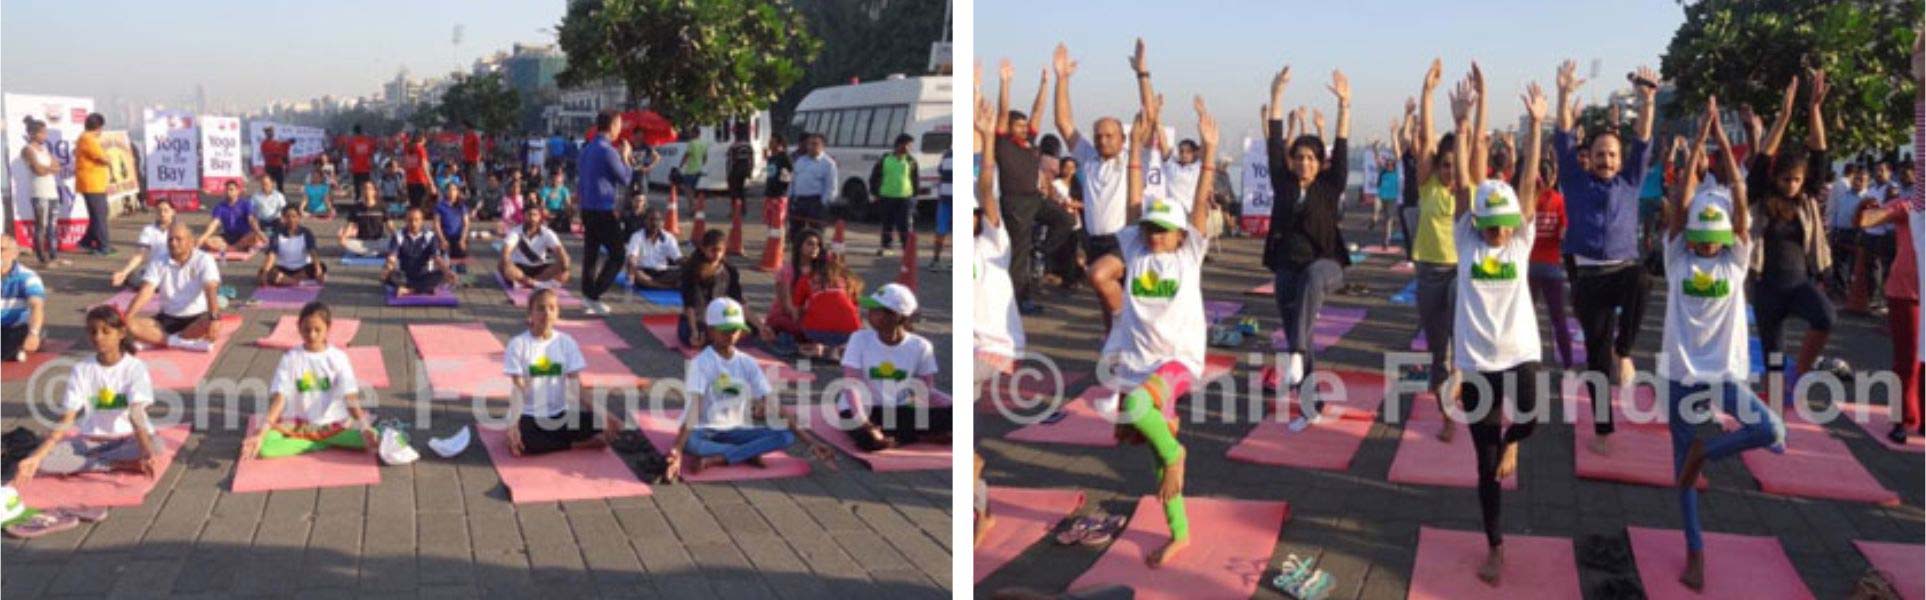 Smile children participate in Yoga by the bay